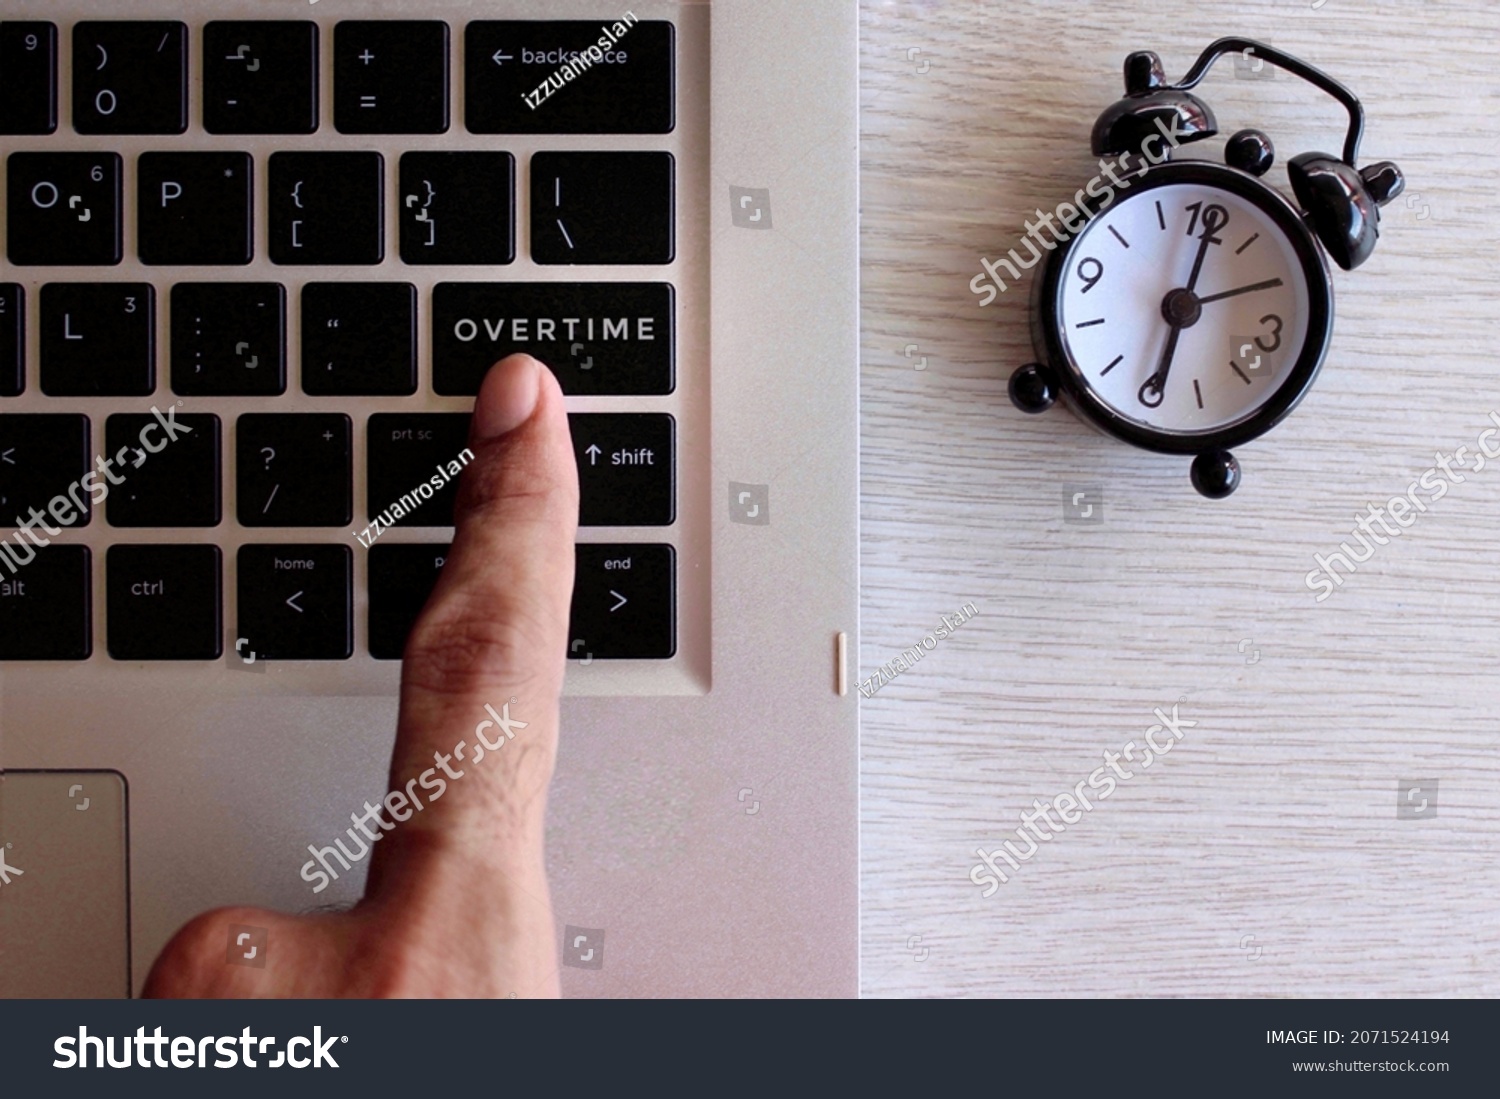 Overtime work concept. Finger pressing keyboard with text OVERTIME and black alarm clock. #2071524194